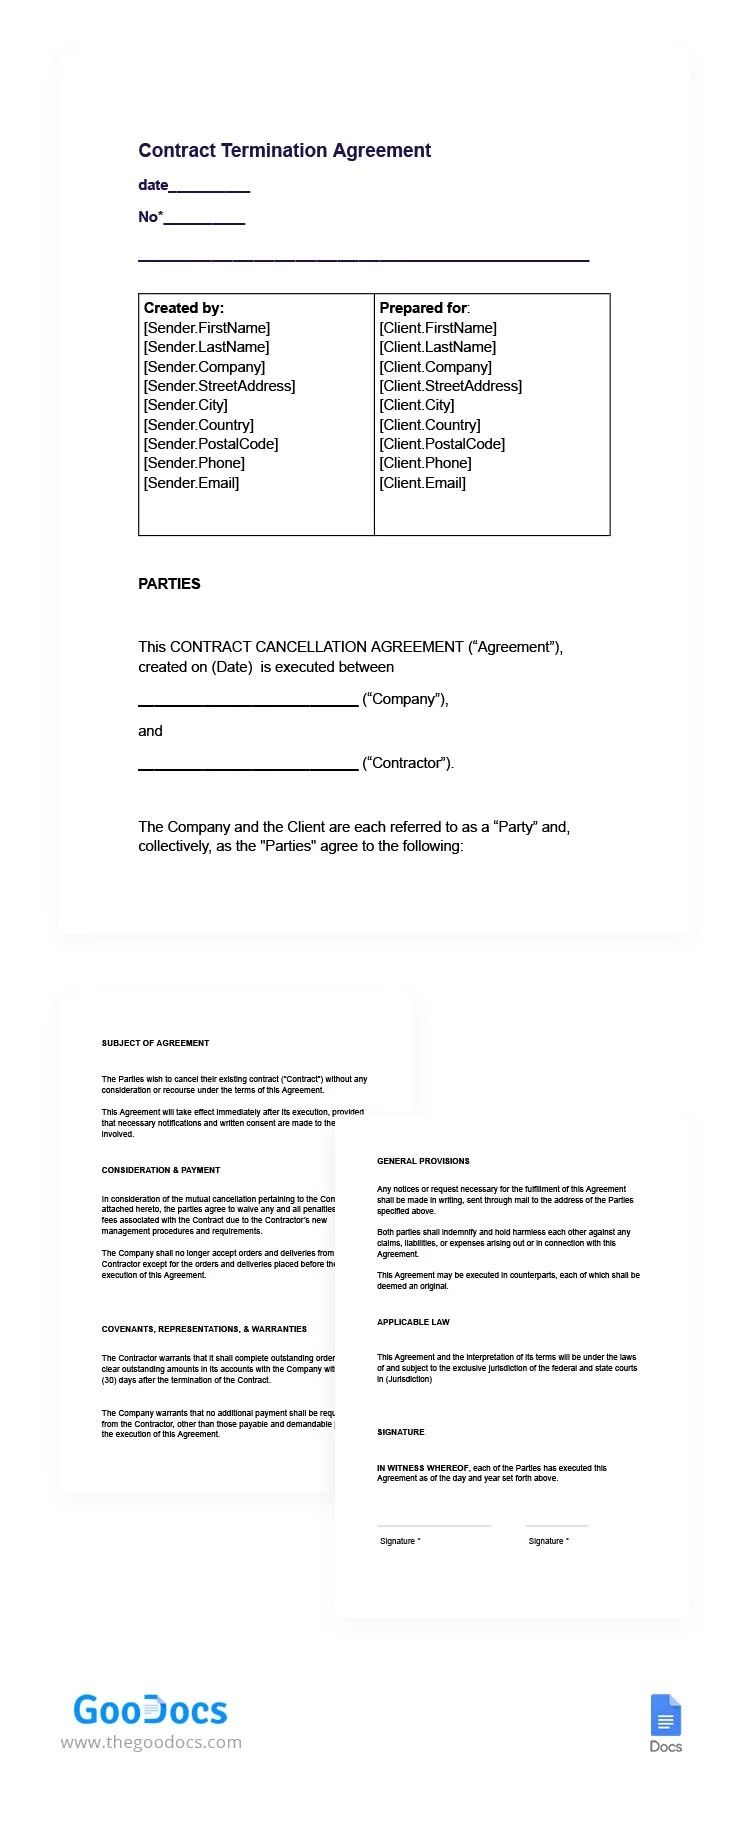 Termination Contract - free Google Docs Template - 10065719